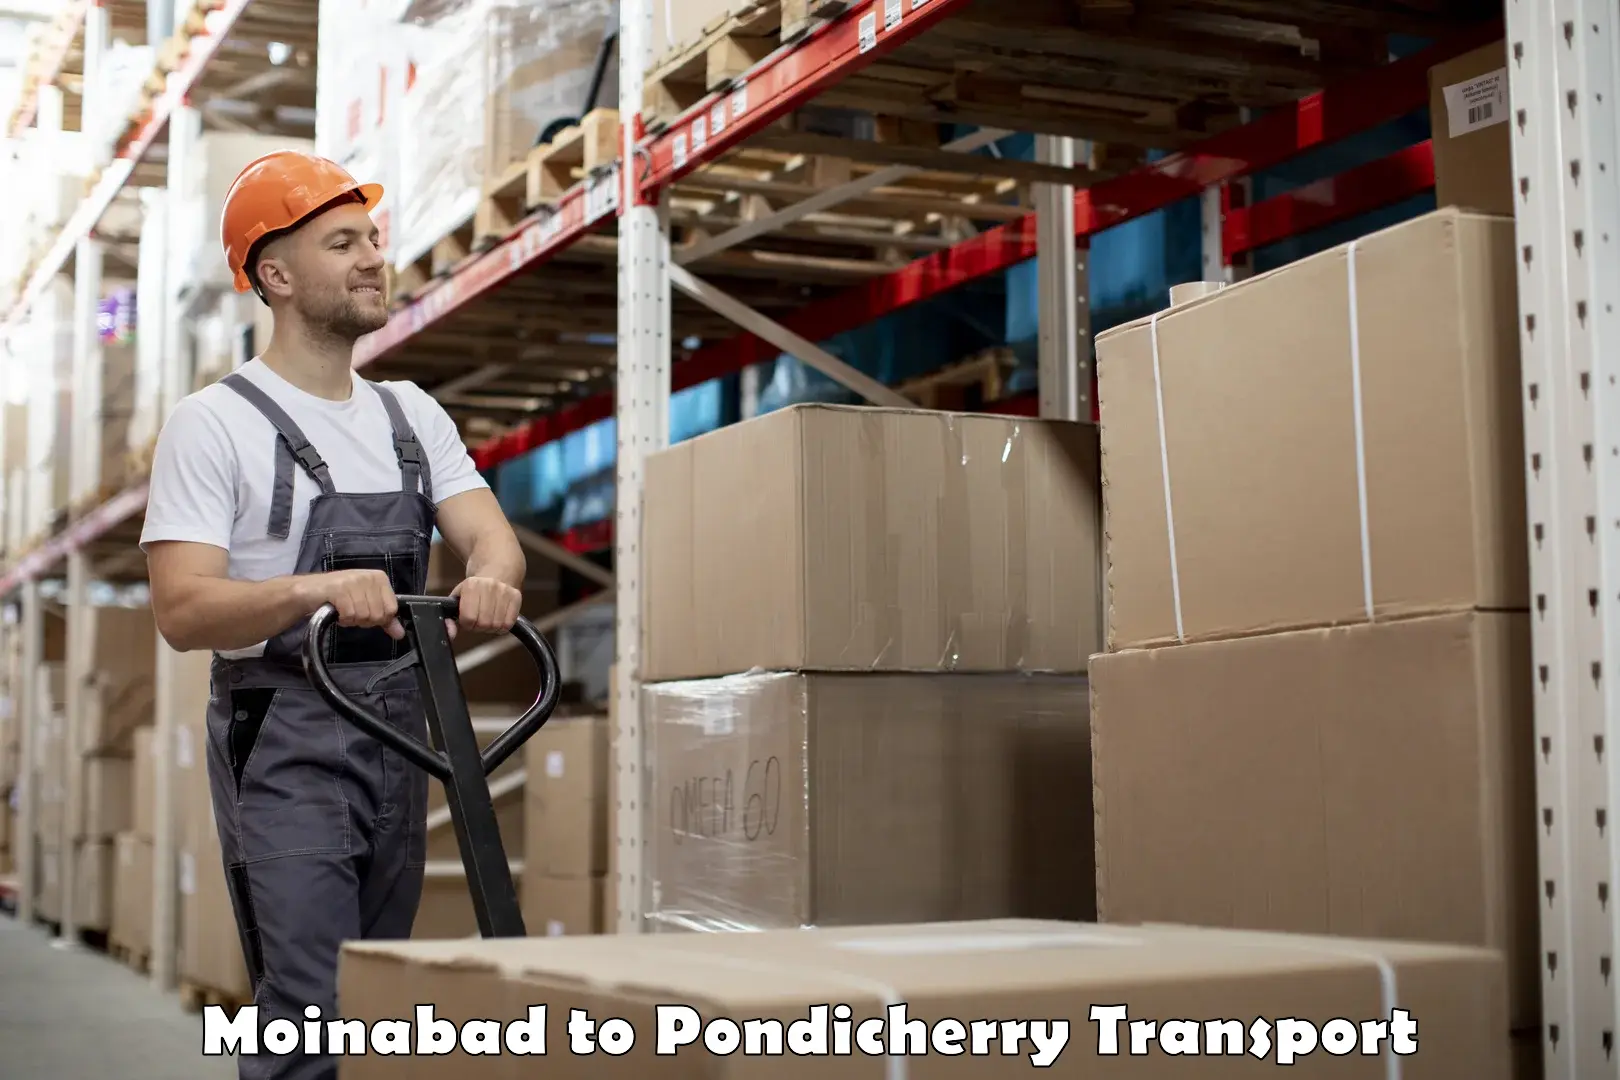 Furniture transport service Moinabad to Pondicherry